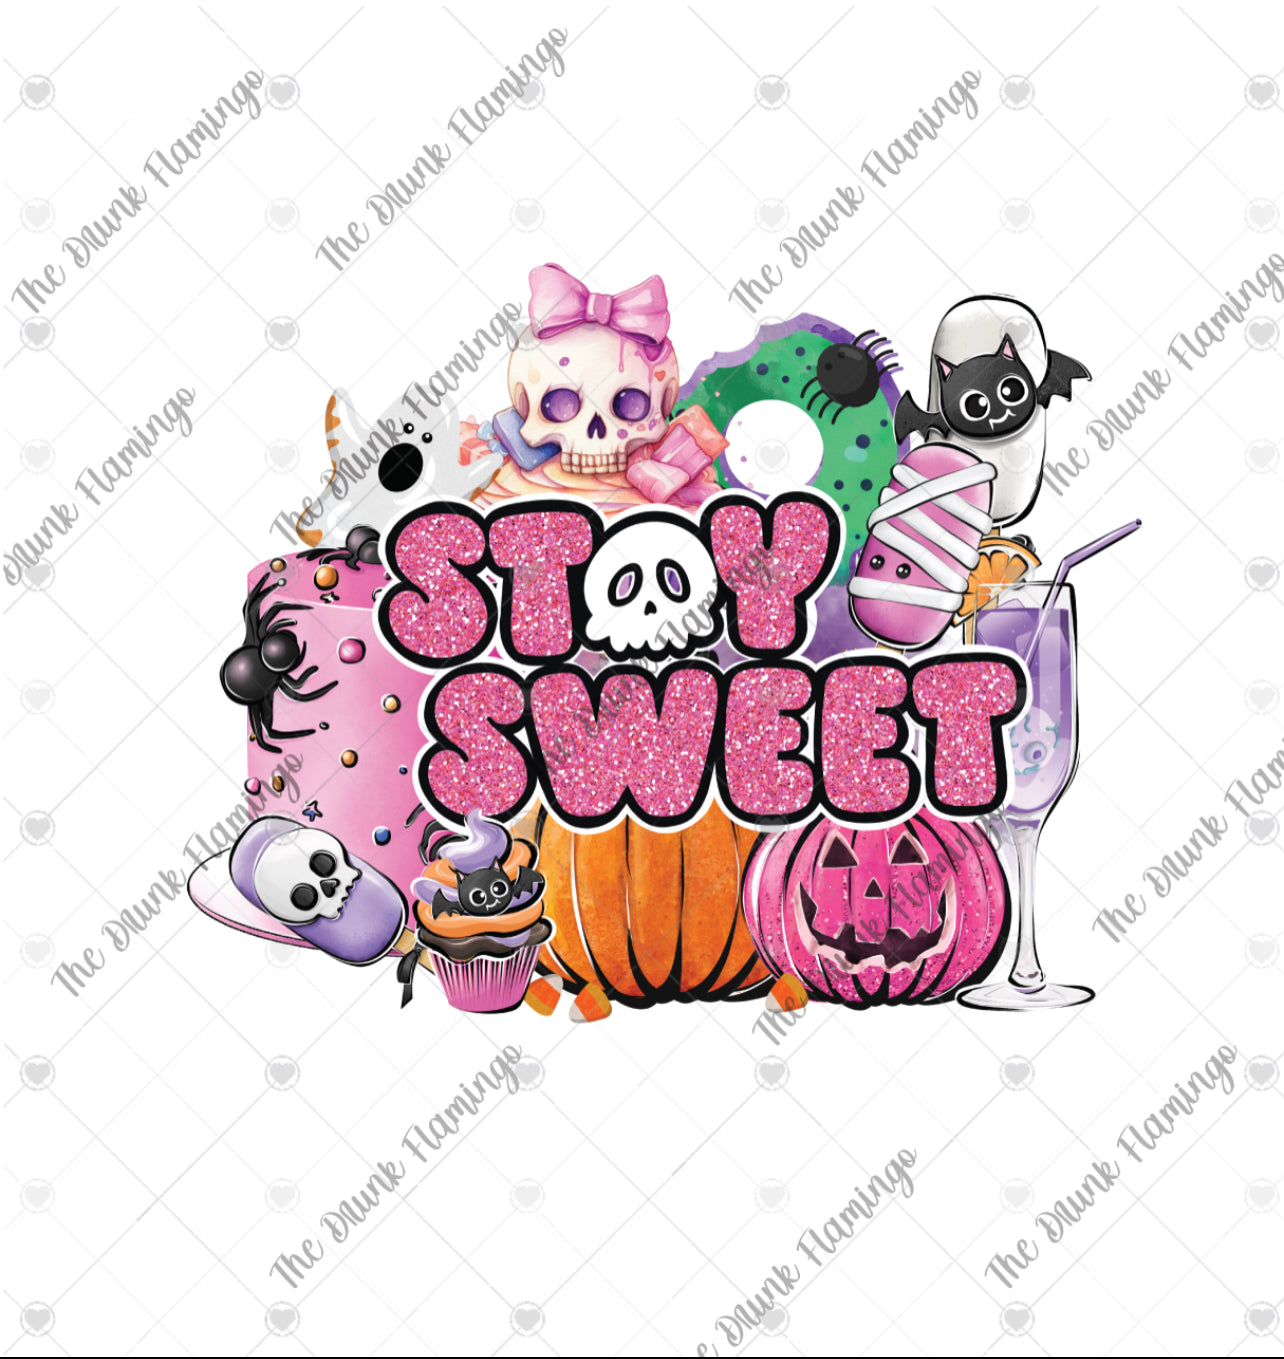 89- Stay Sweet Halloween Treats WHITE backed decal